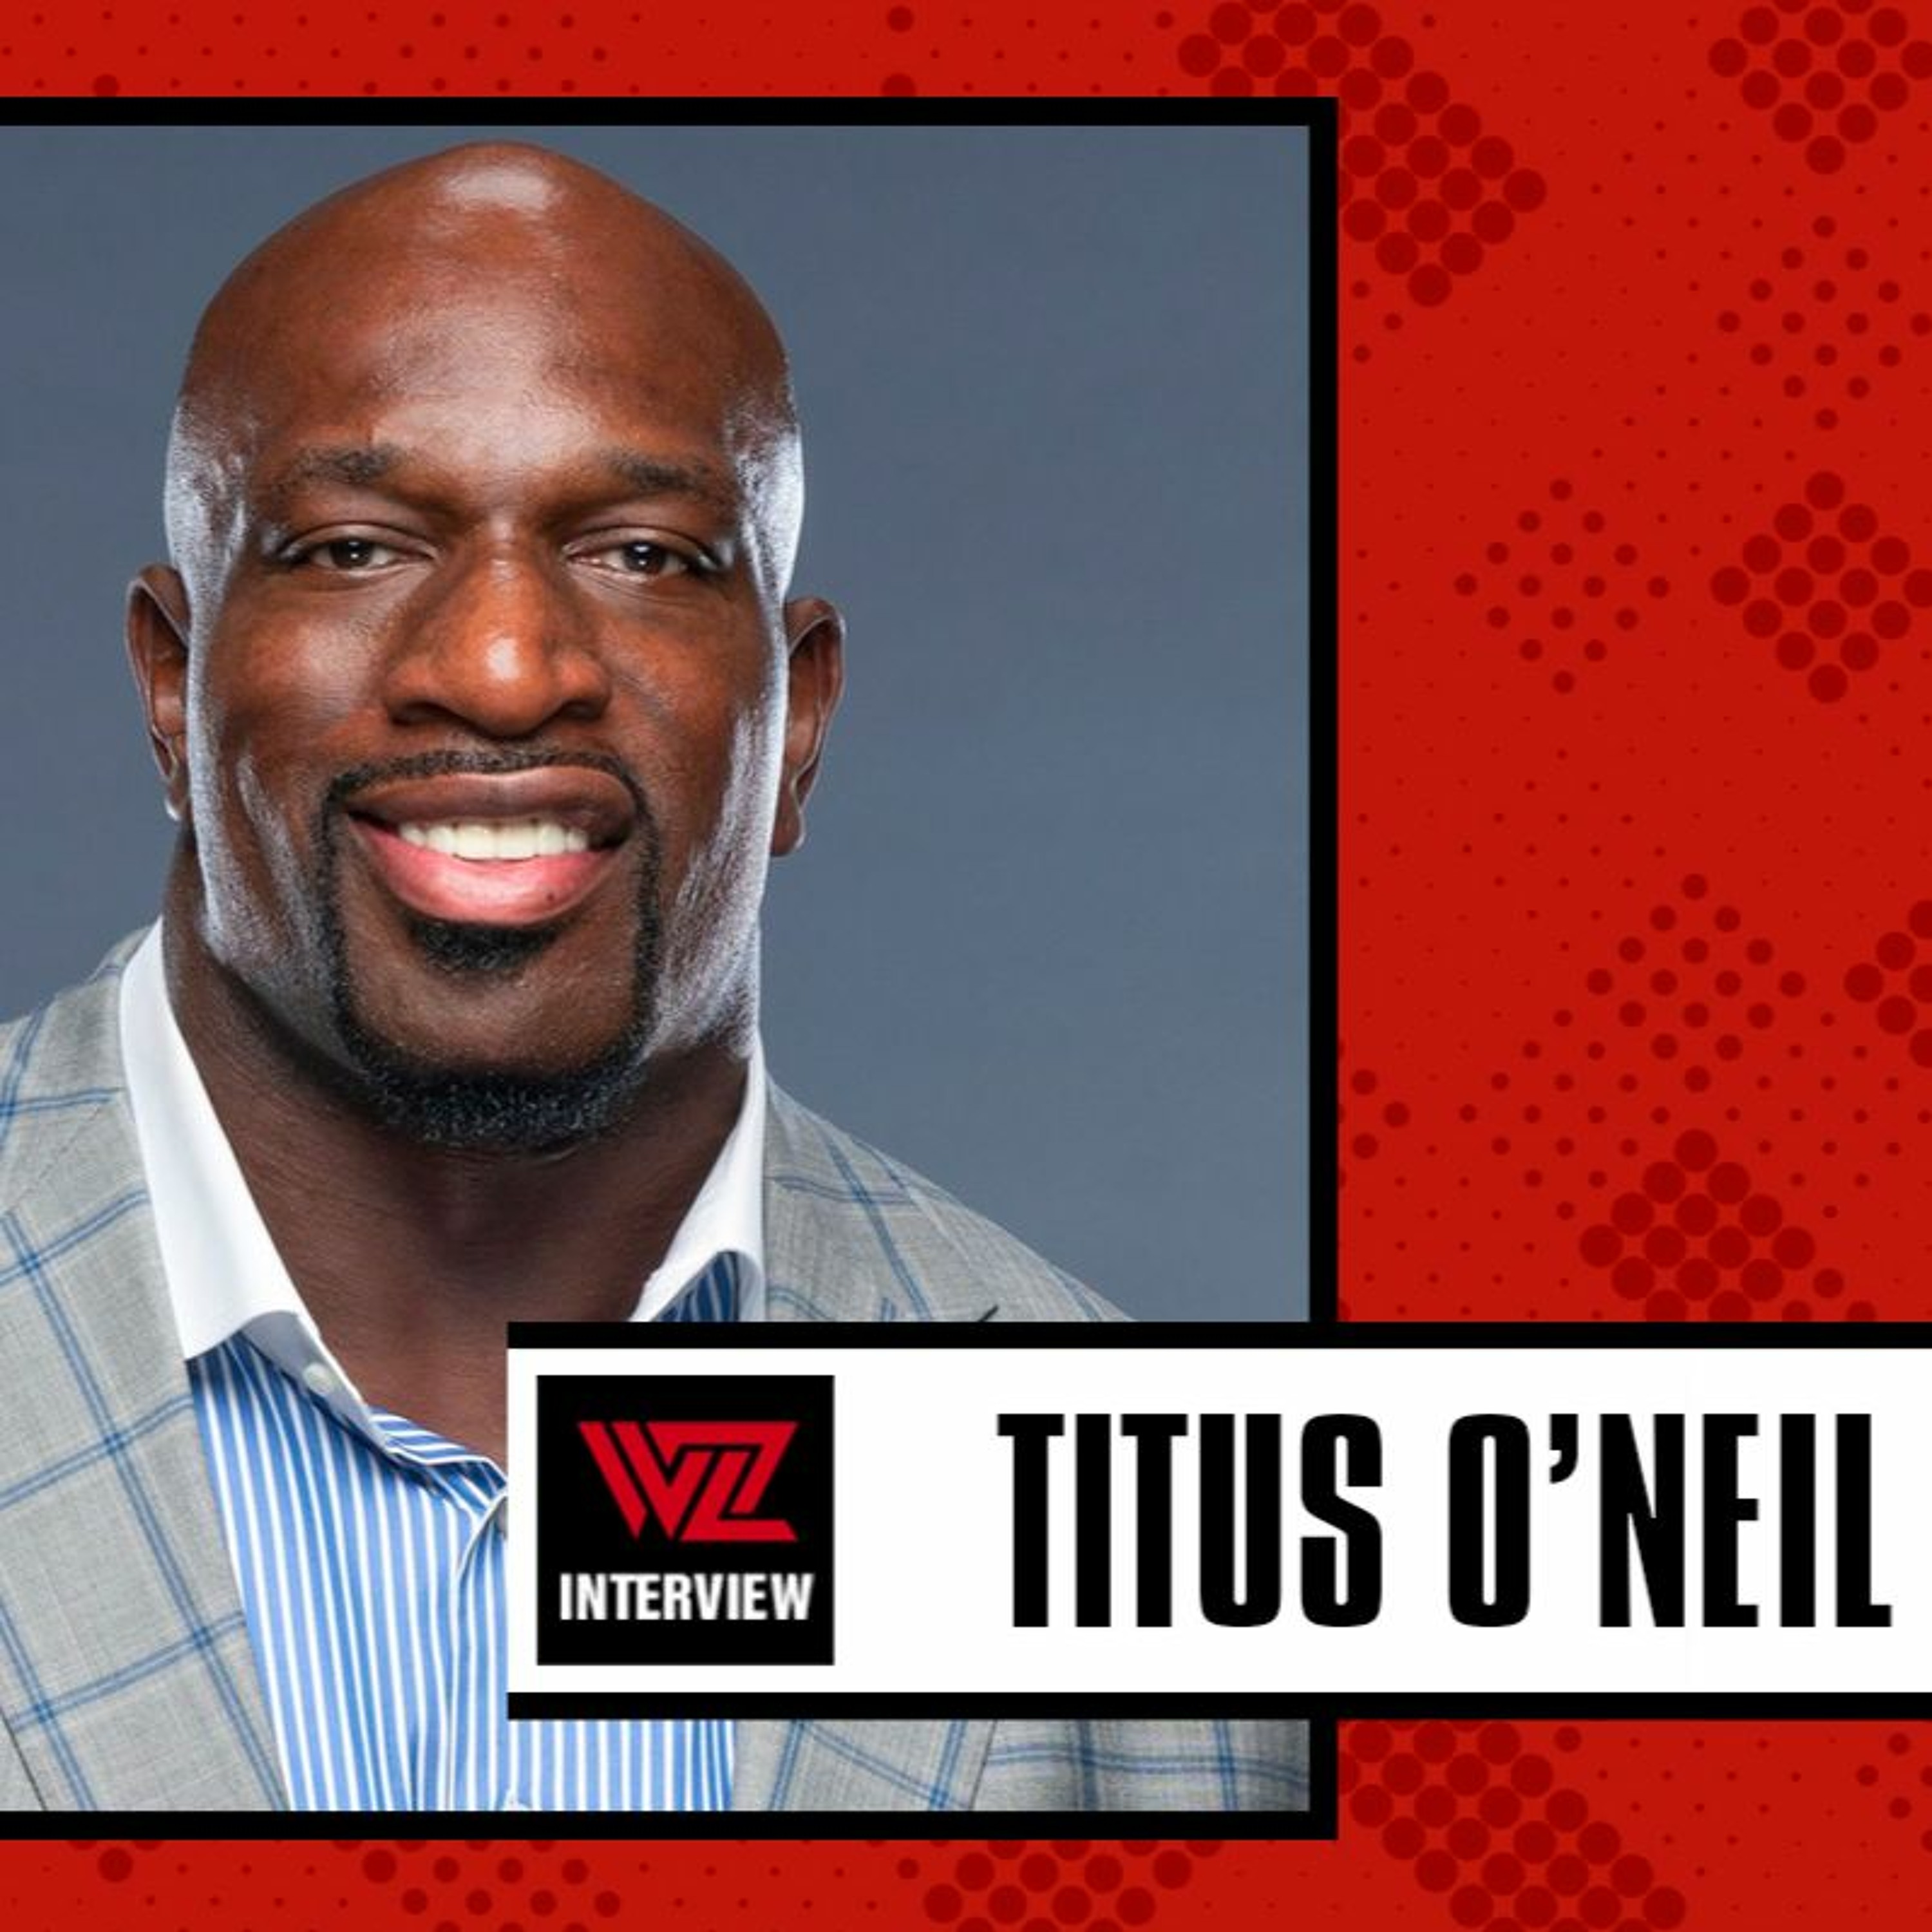 Titus O'Neil On One More Match, His Greatest Accomplishments